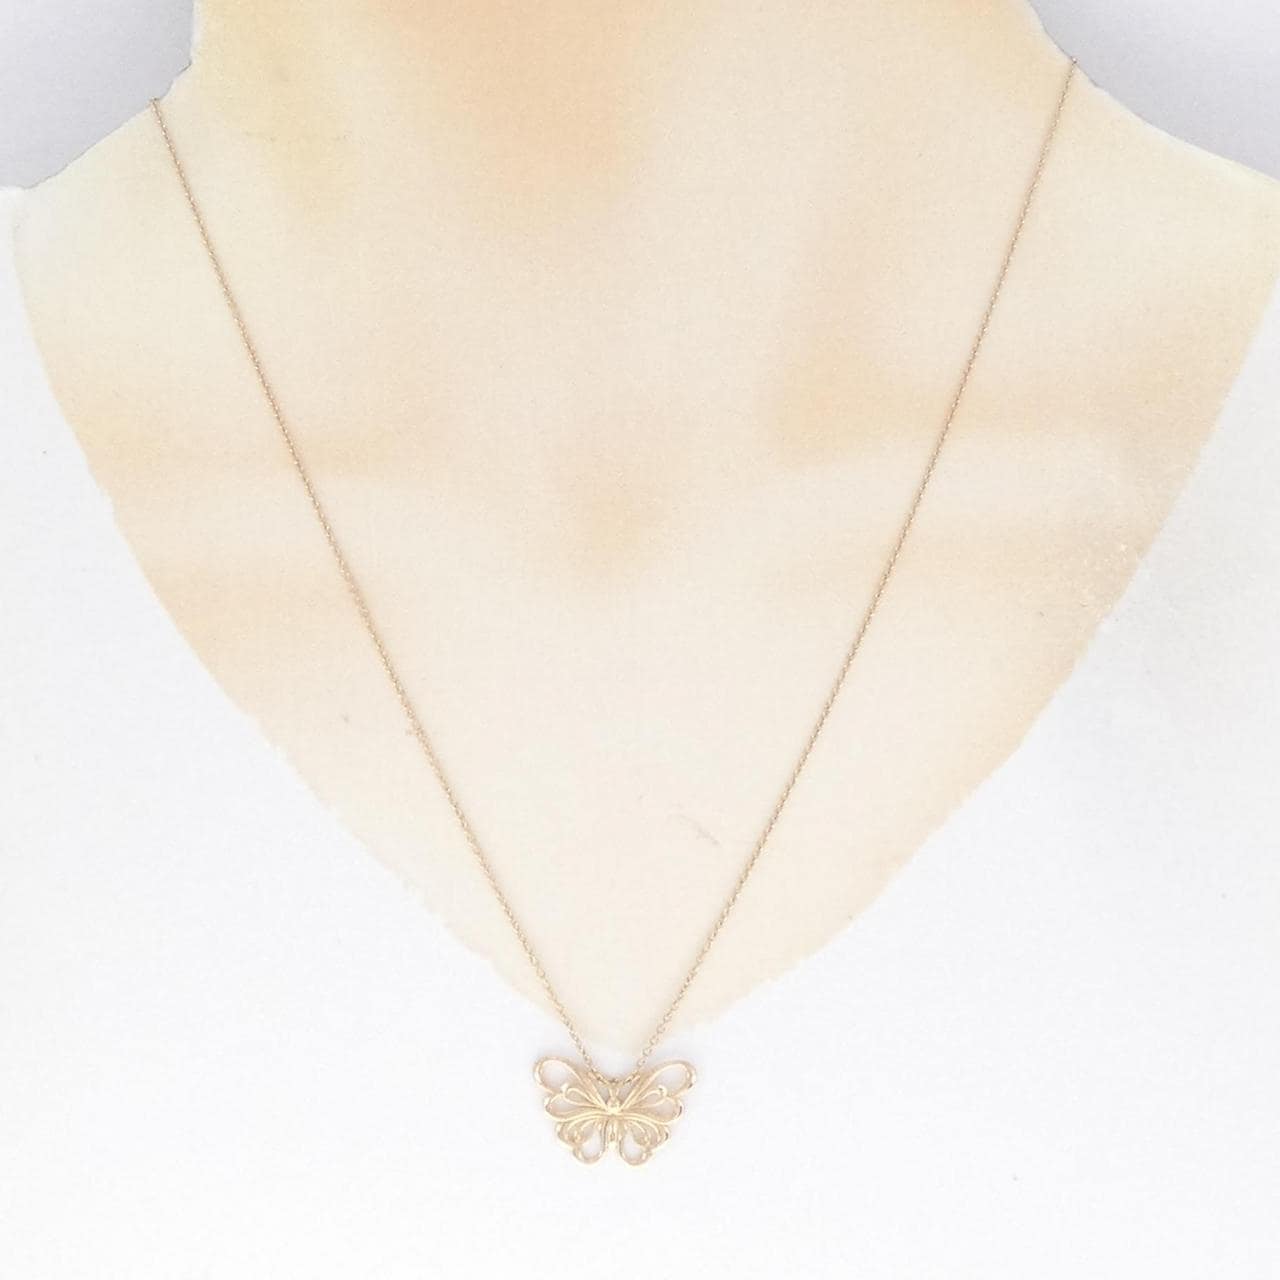 TIFFANY butterfly necklace